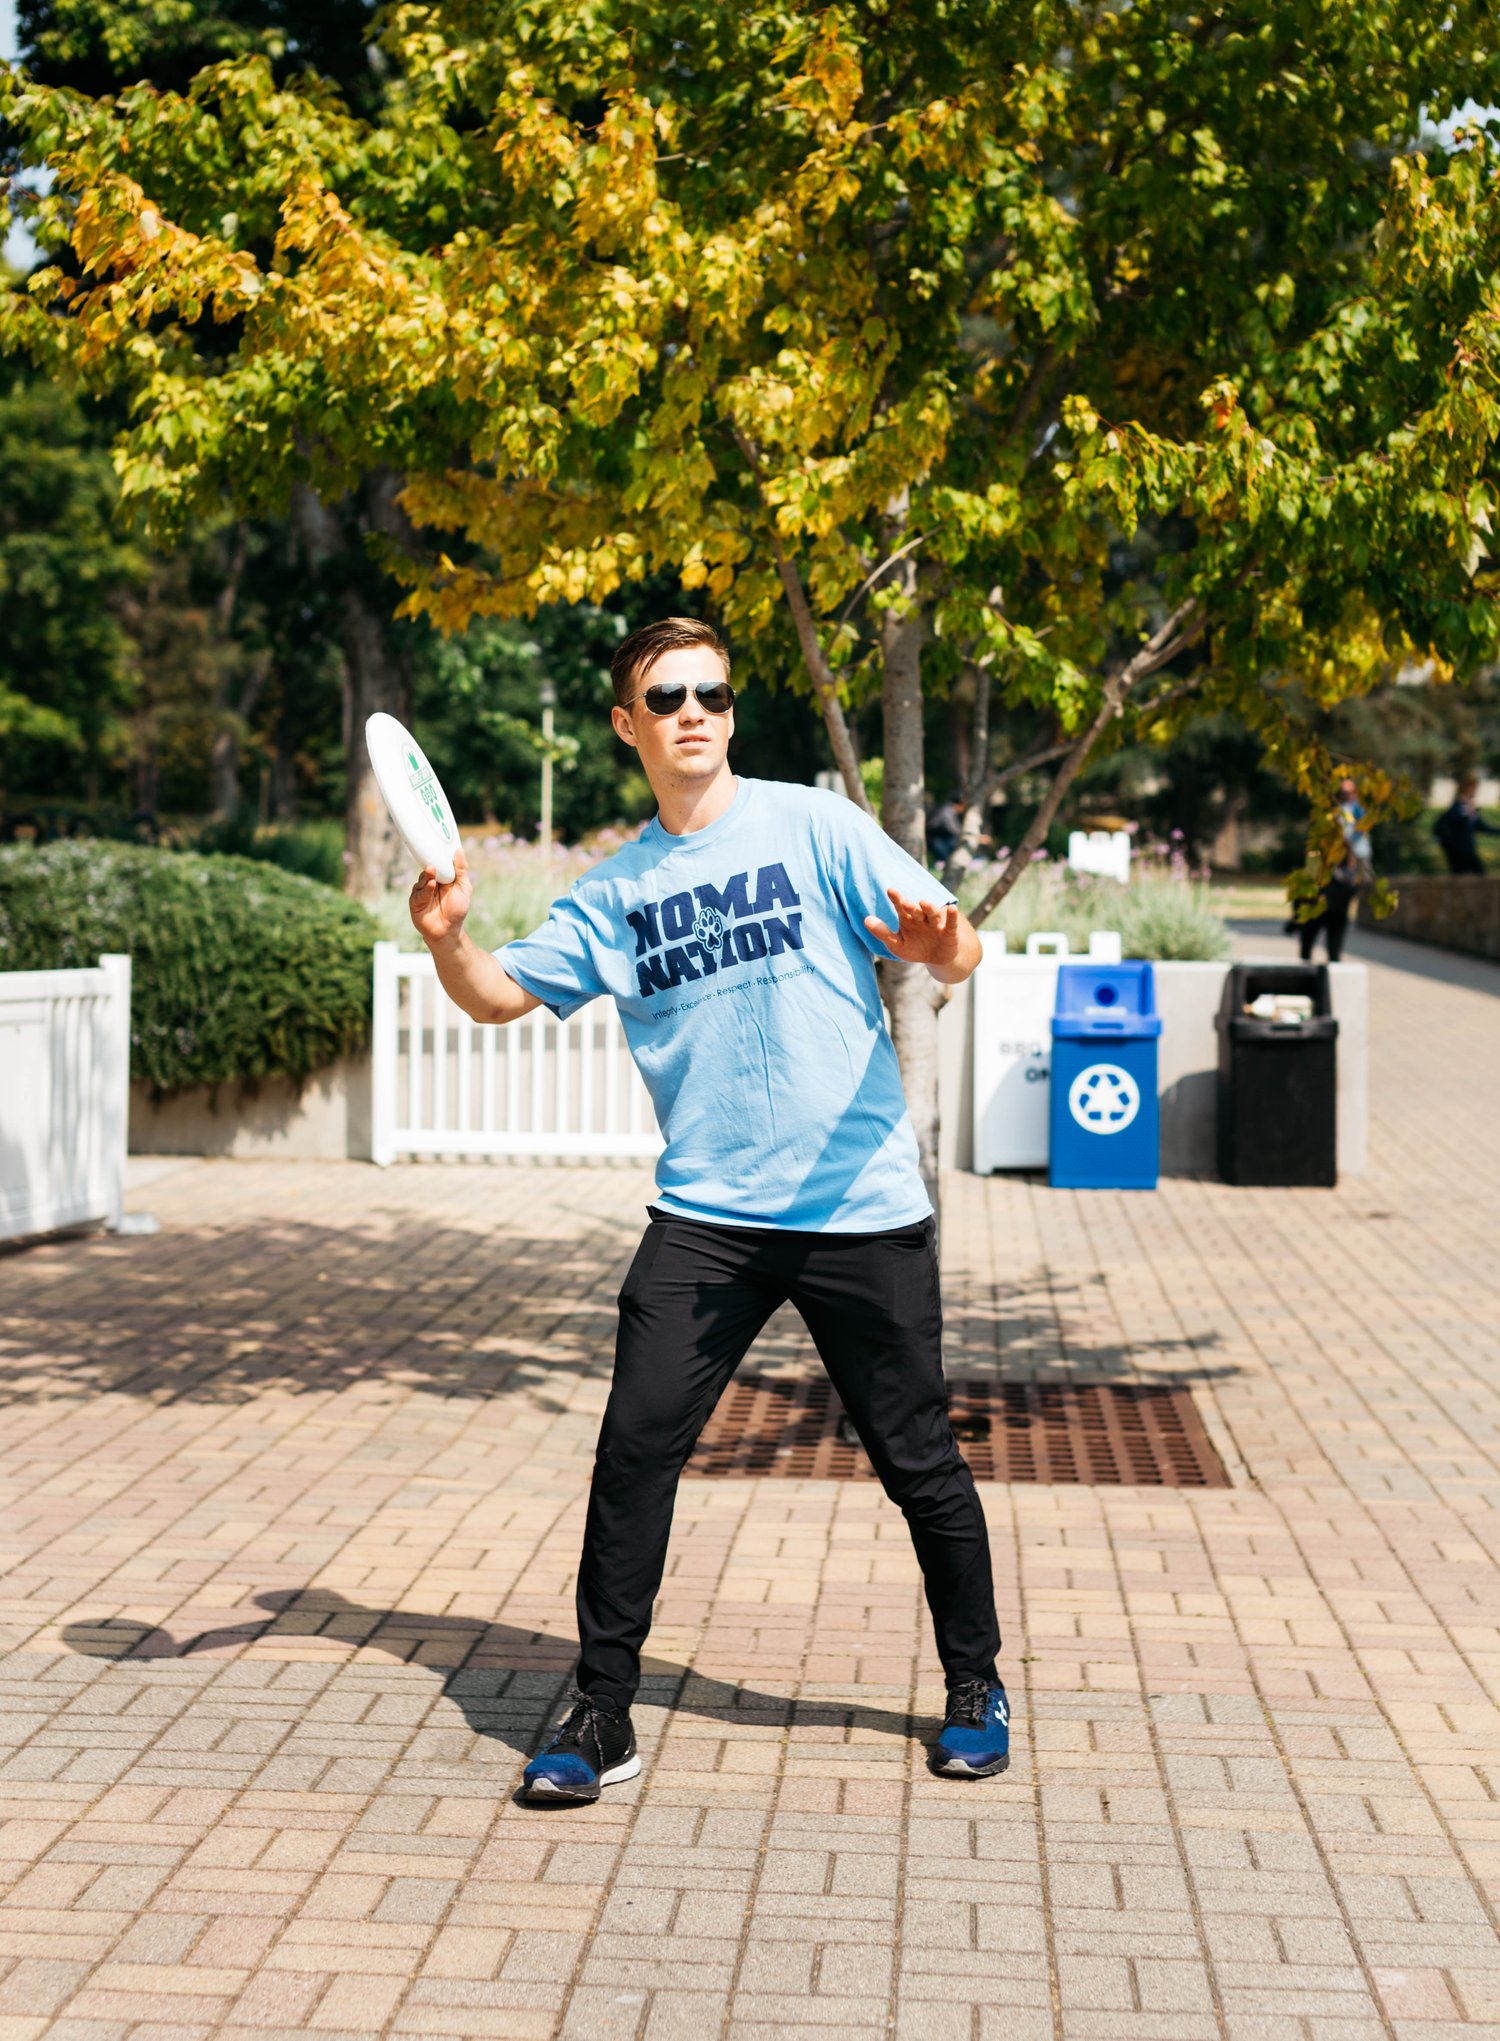 A student wearing a 'Noma Nation' t-shirt throwing a frisbee